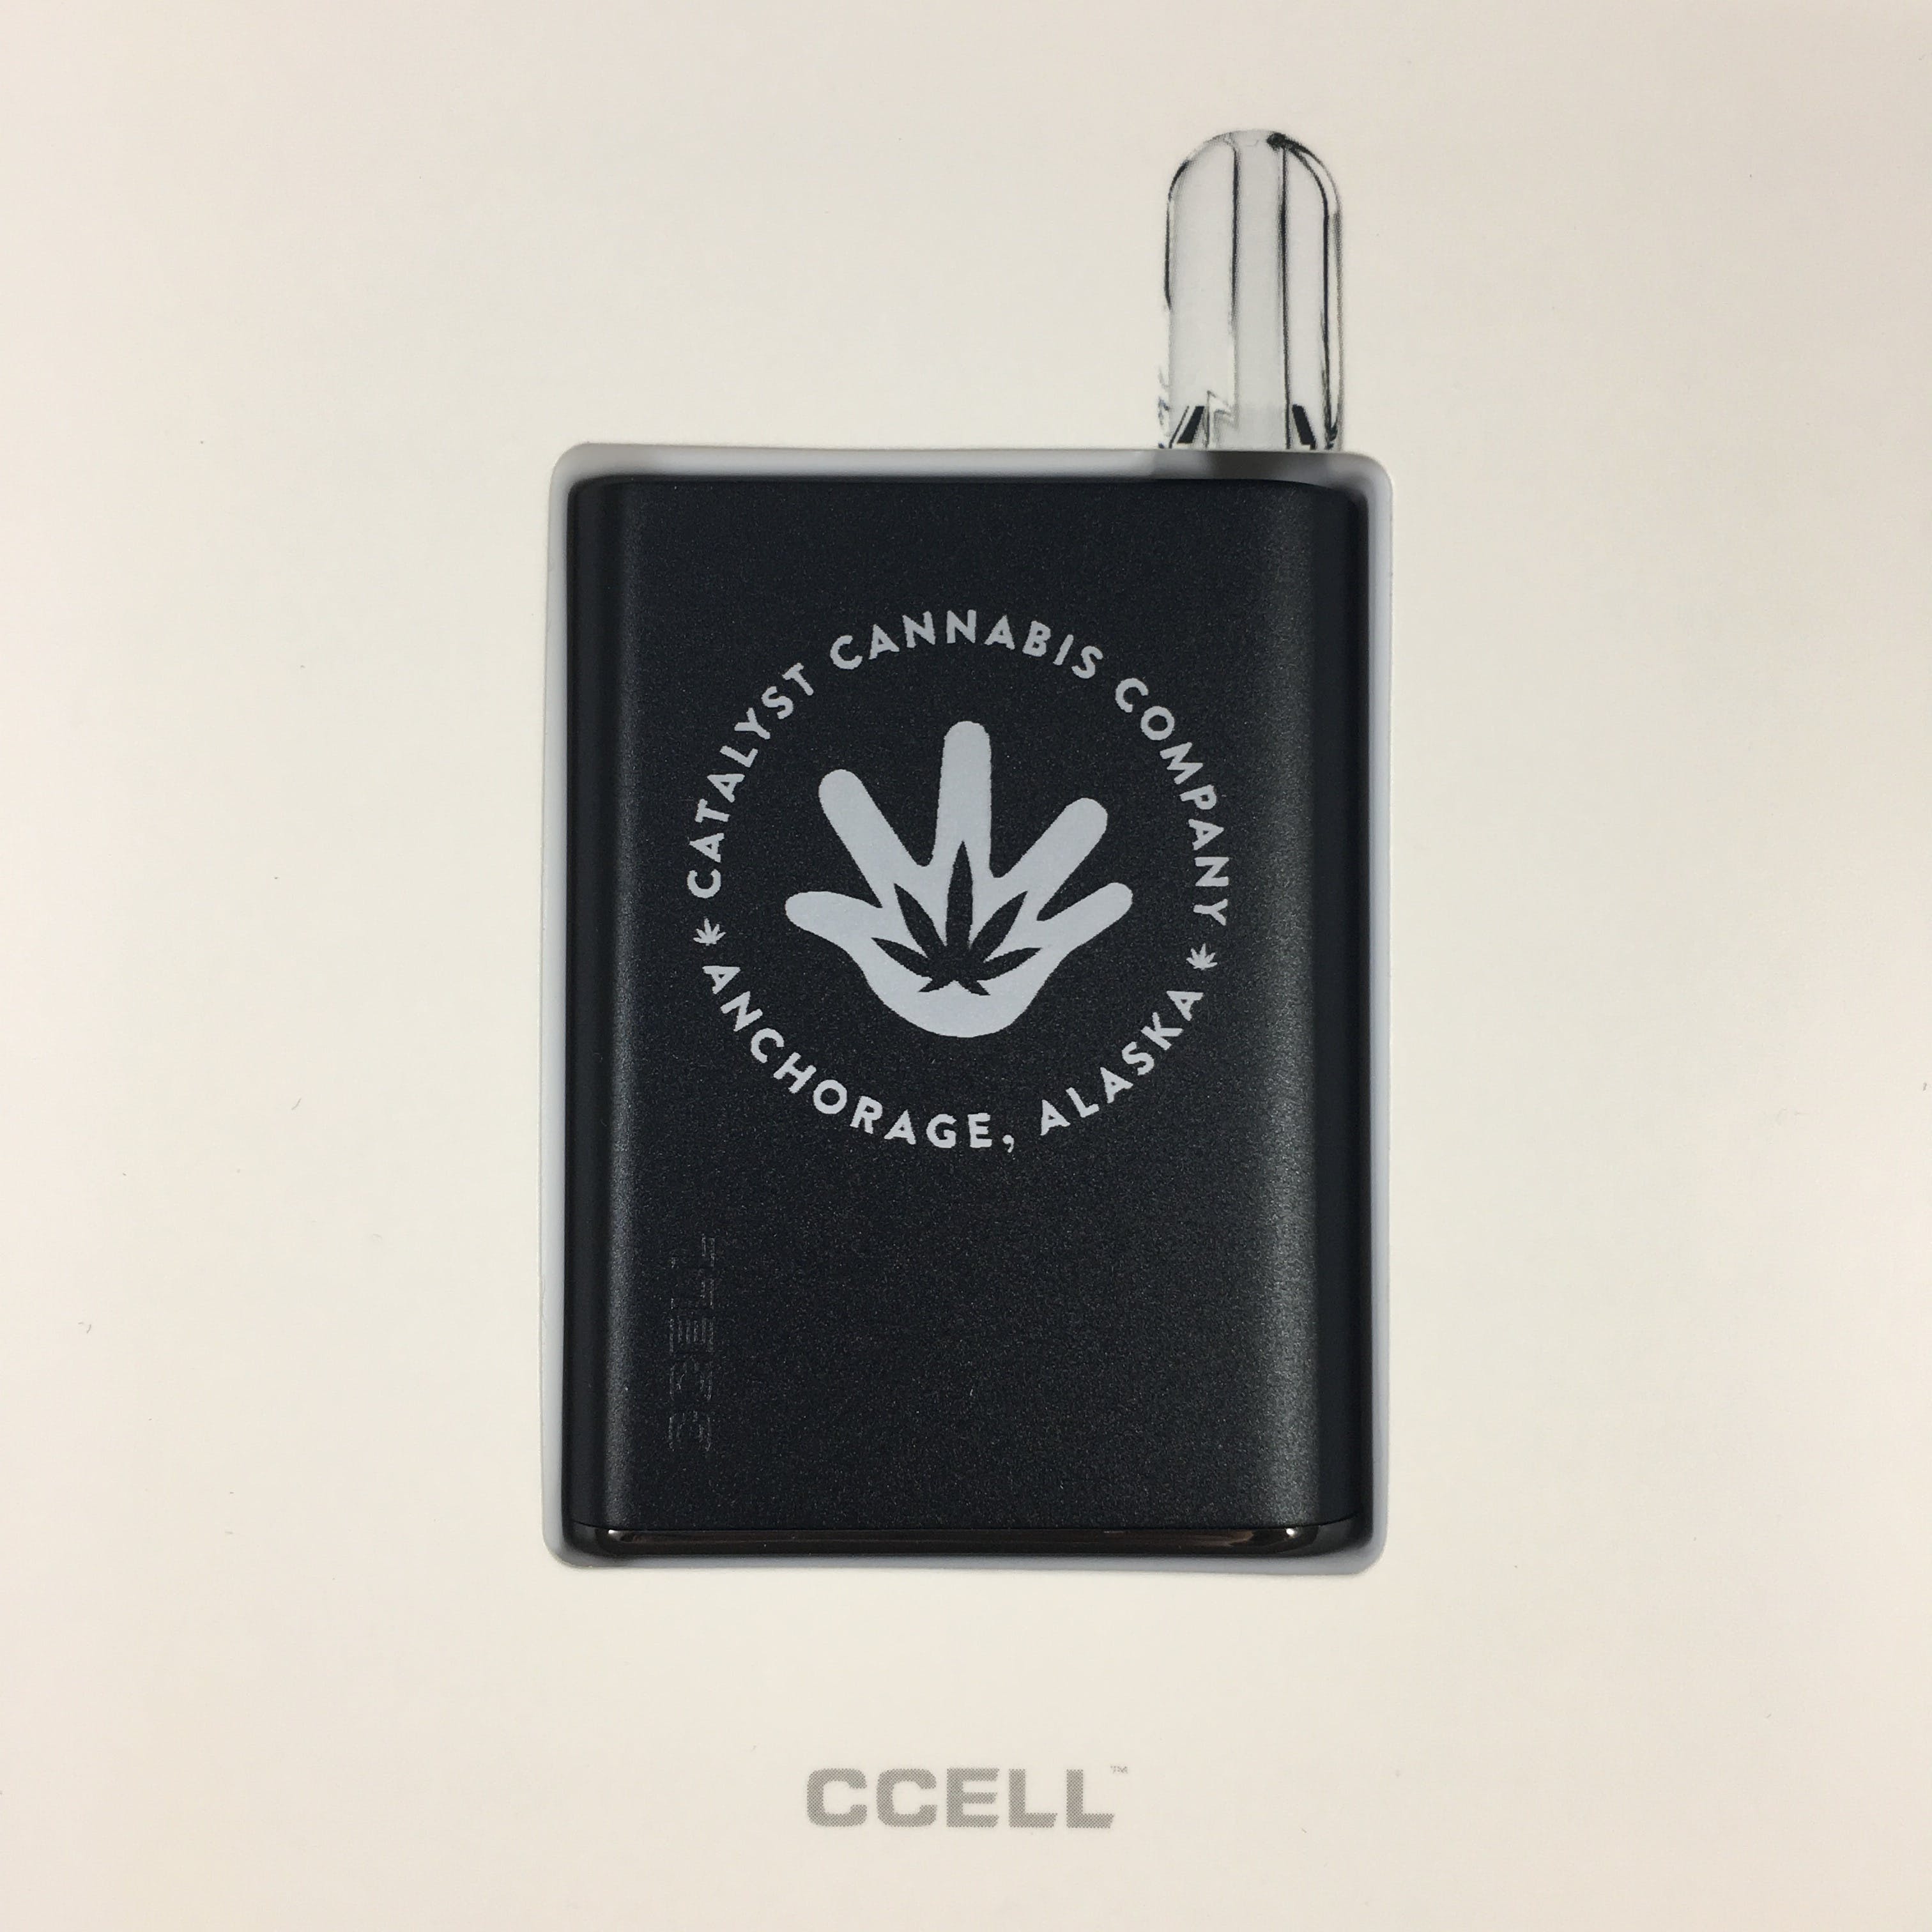 PALM C-Cell Battery